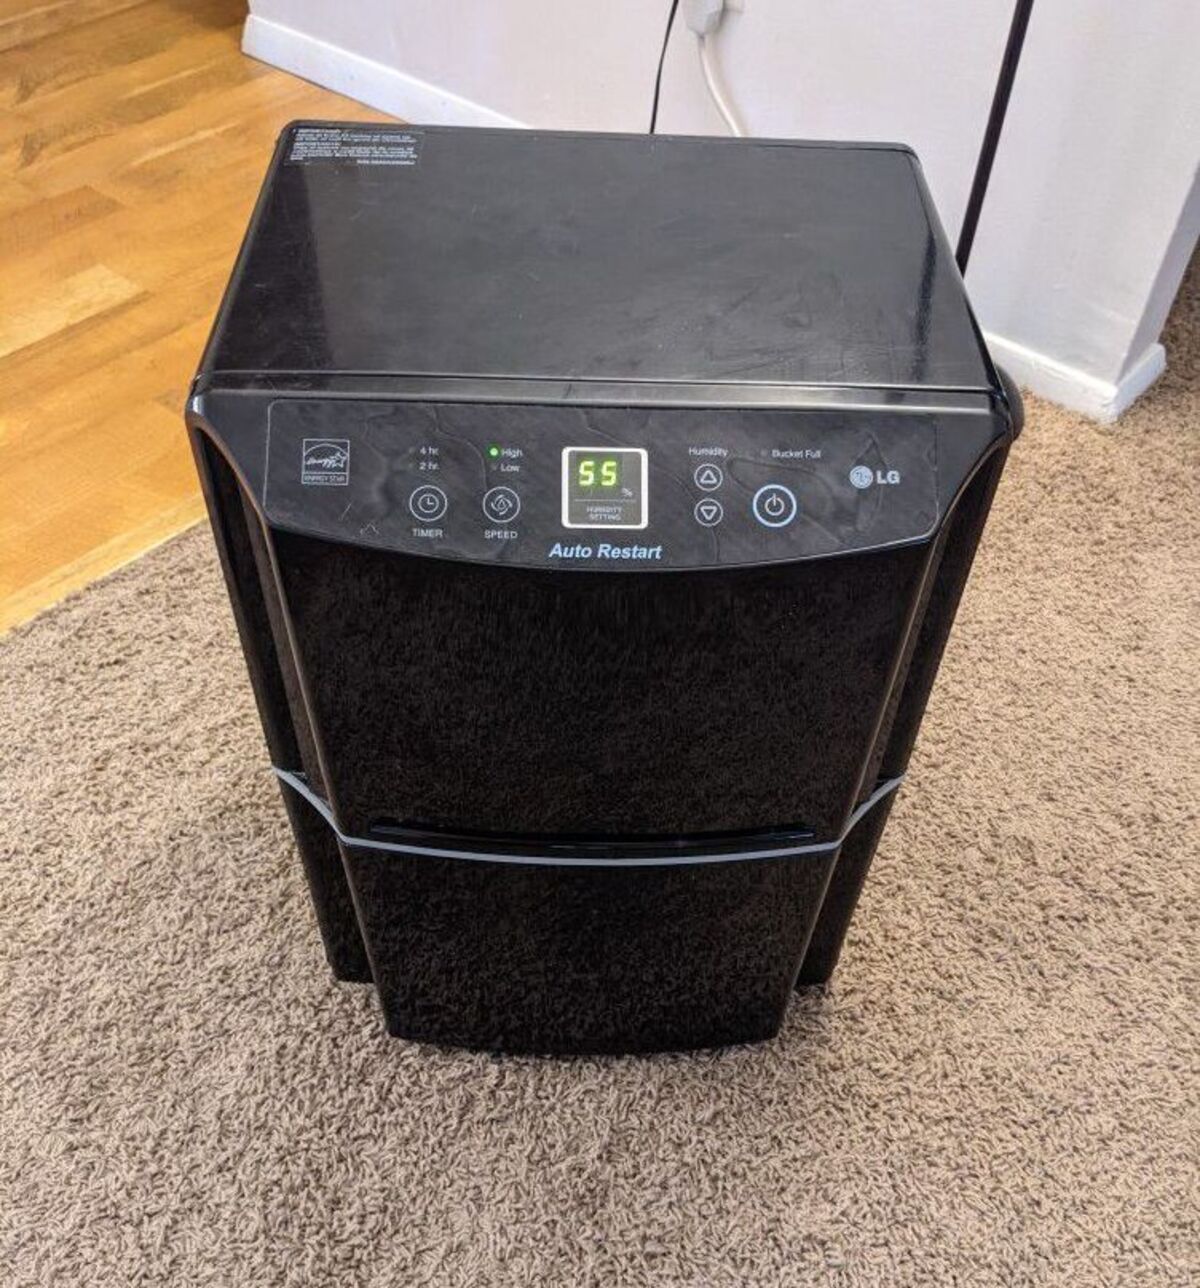 How To Fix The Error Code LO For LG Dehumidifier